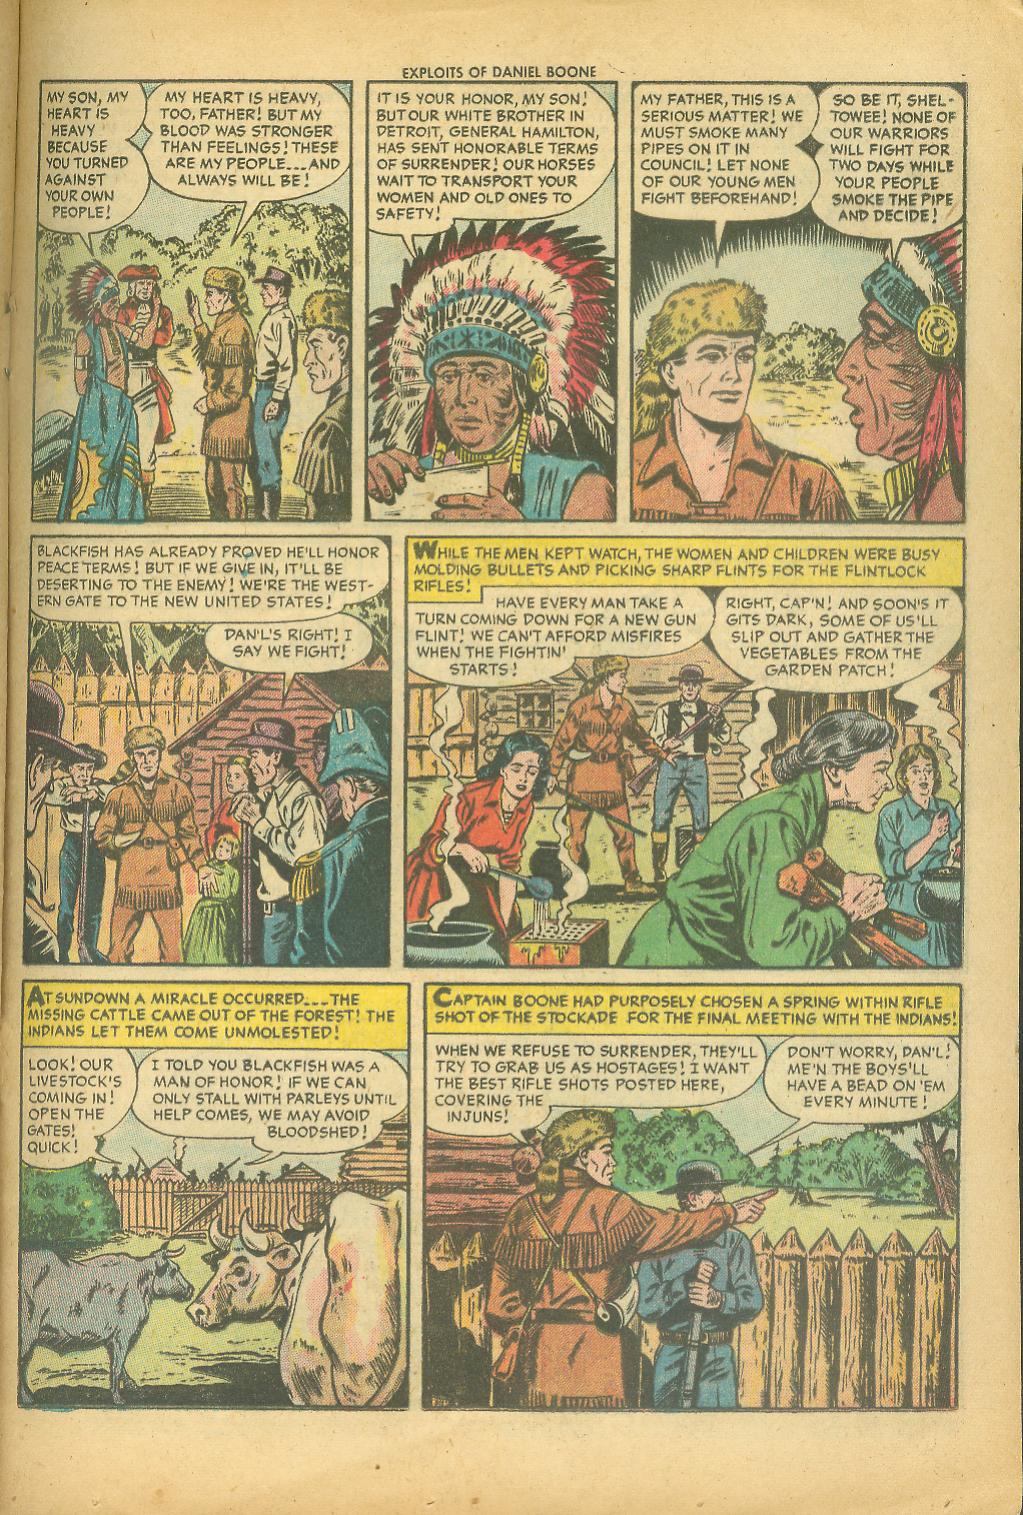 Read online Exploits of Daniel Boone comic -  Issue #1 - 21